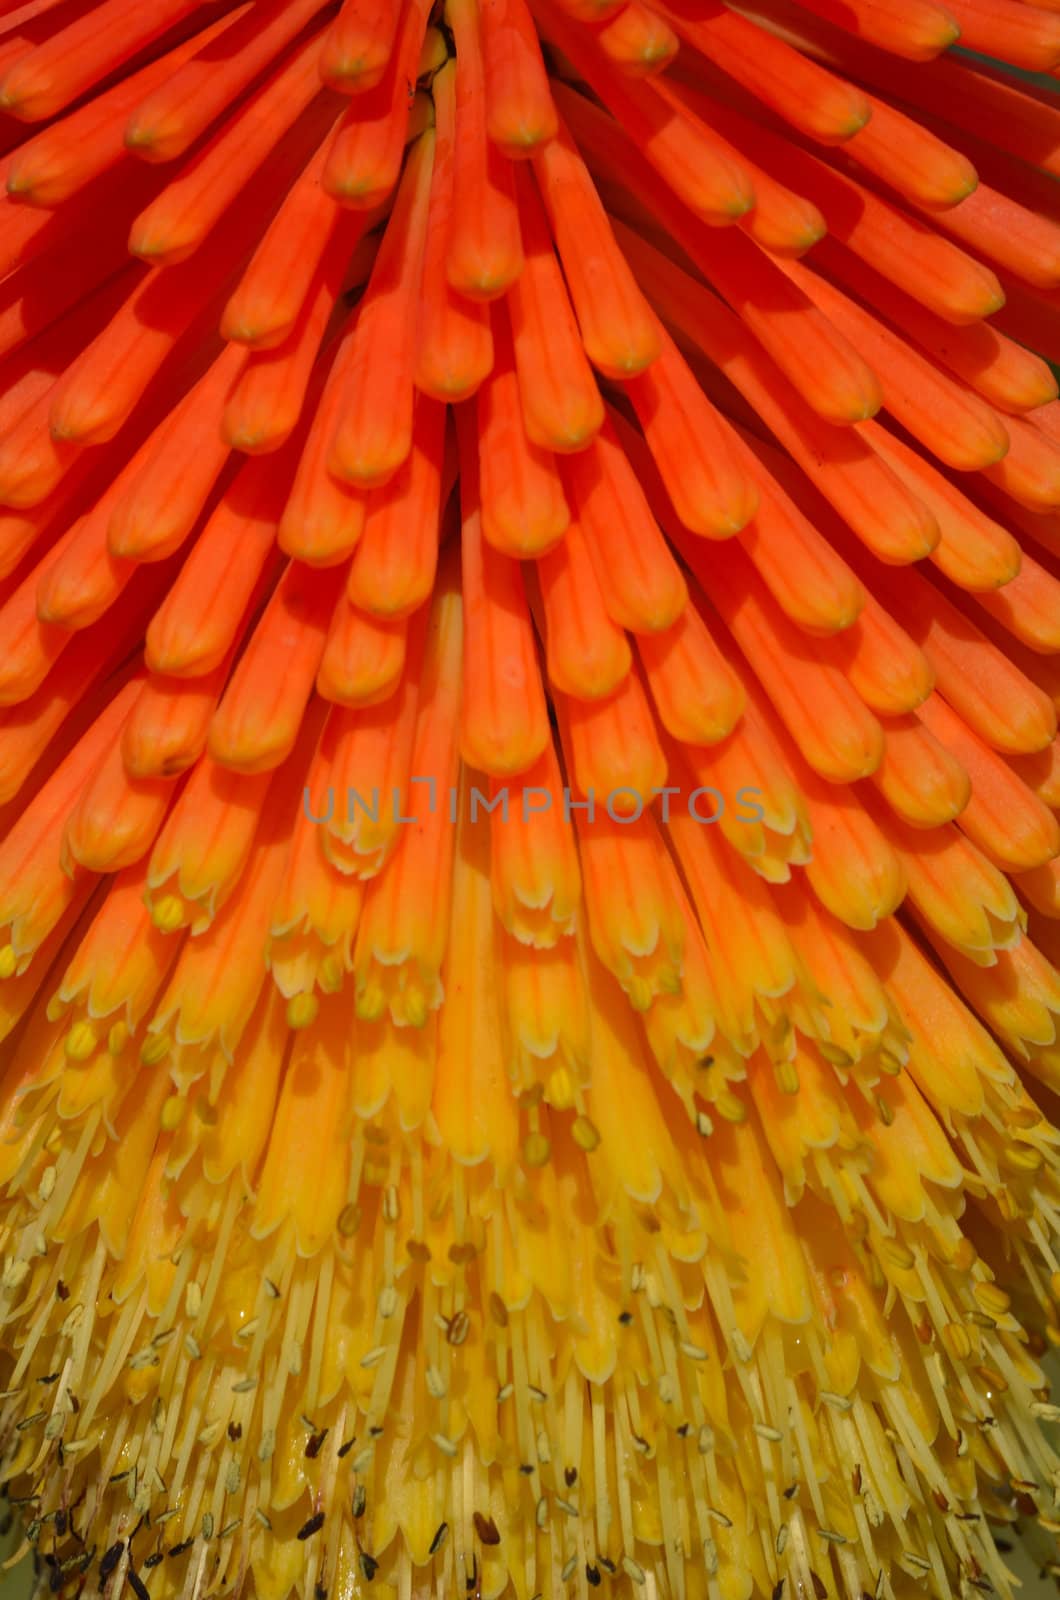 Detail of red hot poker by pauws99